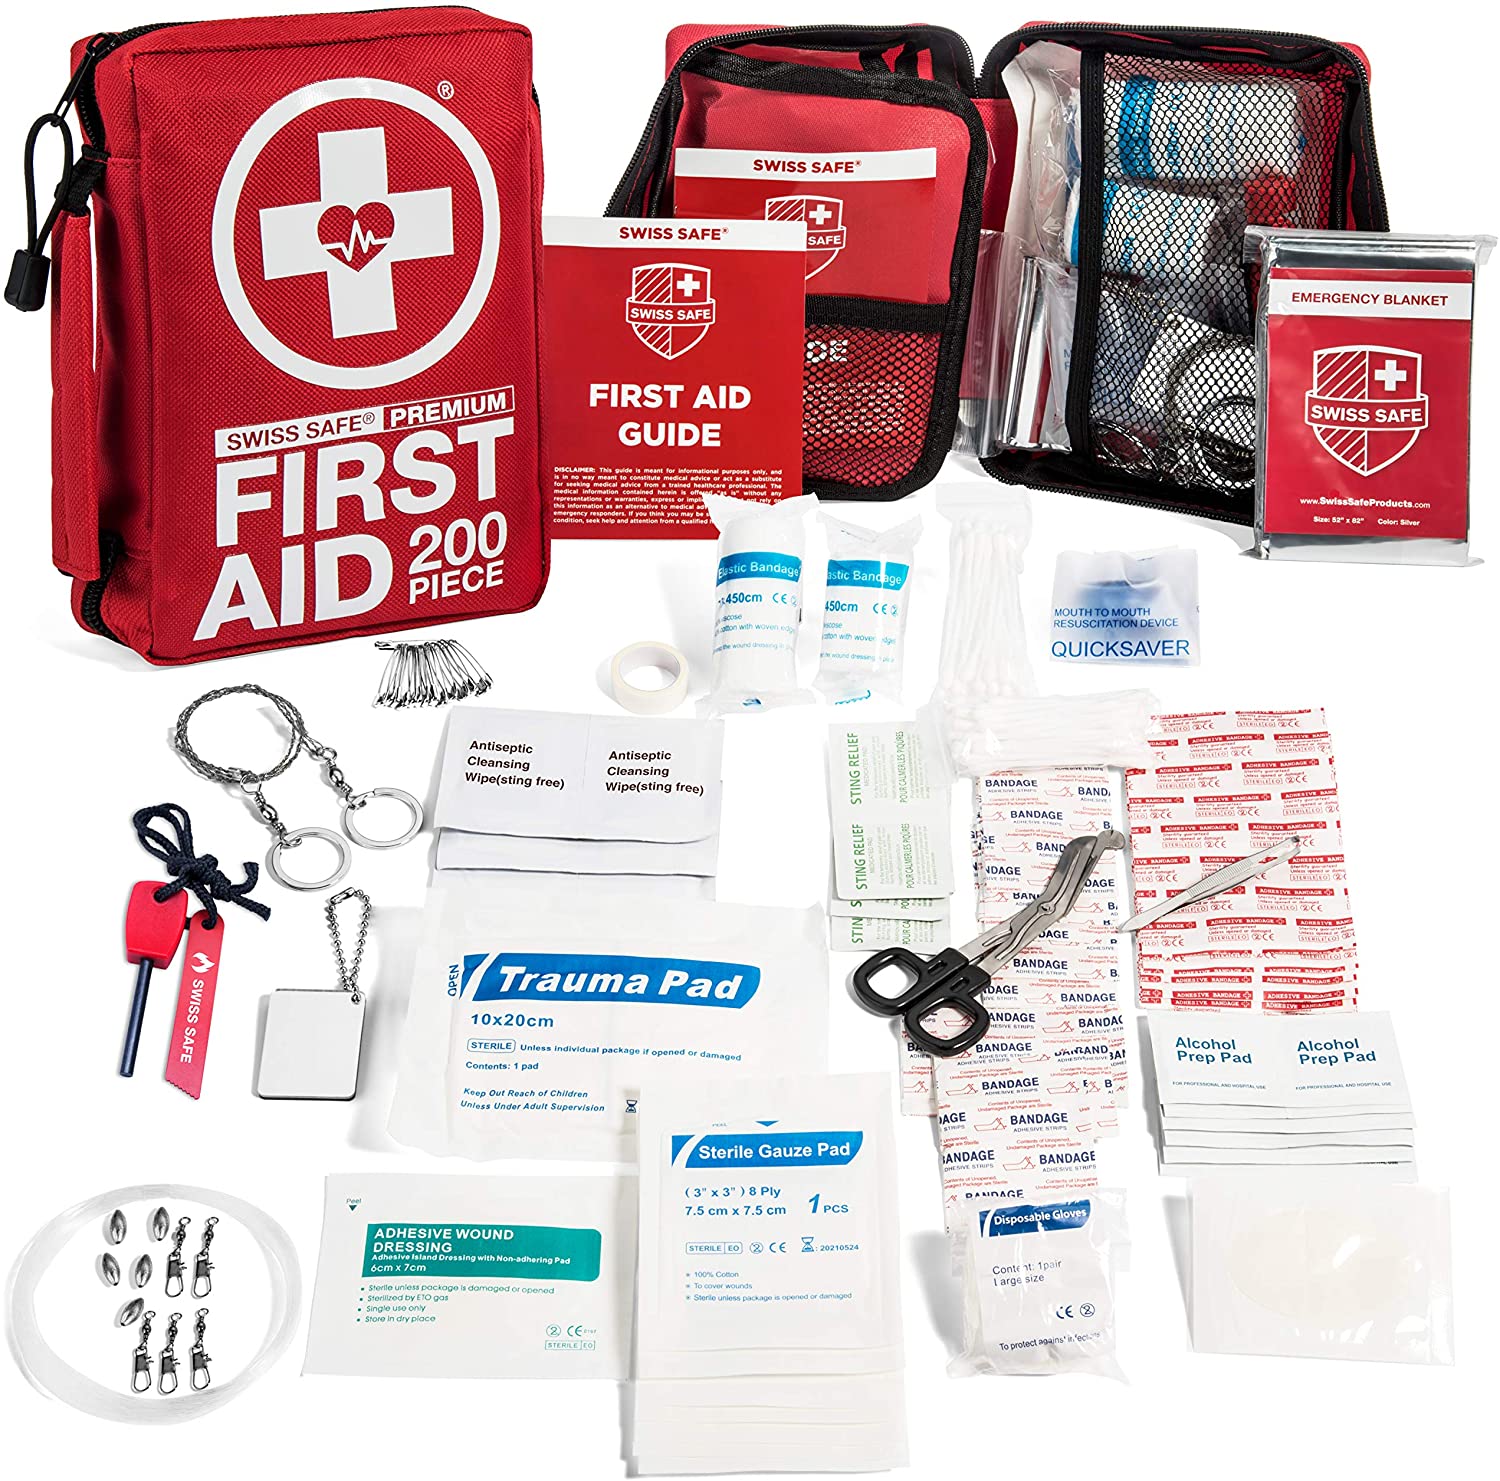  Survival First Aid Kit Checklist You Can’t Live Without 200-Piece-Professional-First-Aid-Kit-for-Home-Car-or-Work-Plus-Emergency-Medical-Supplies-for-Camping-Hunting-Outdoor-Hiking-Survival